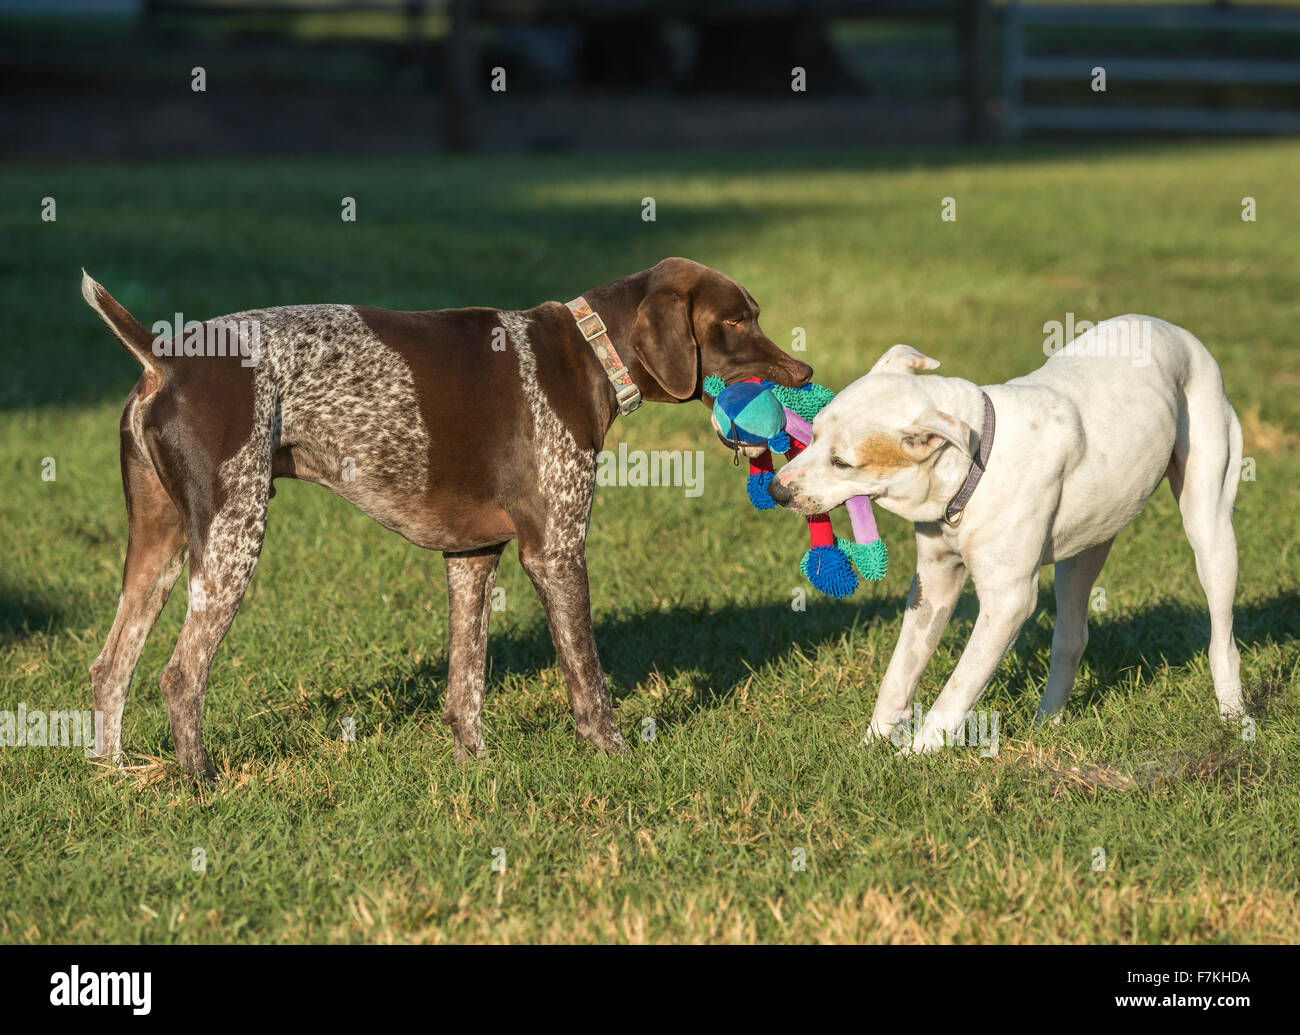 Two dogs tug with toy in grass yard Stock Photo